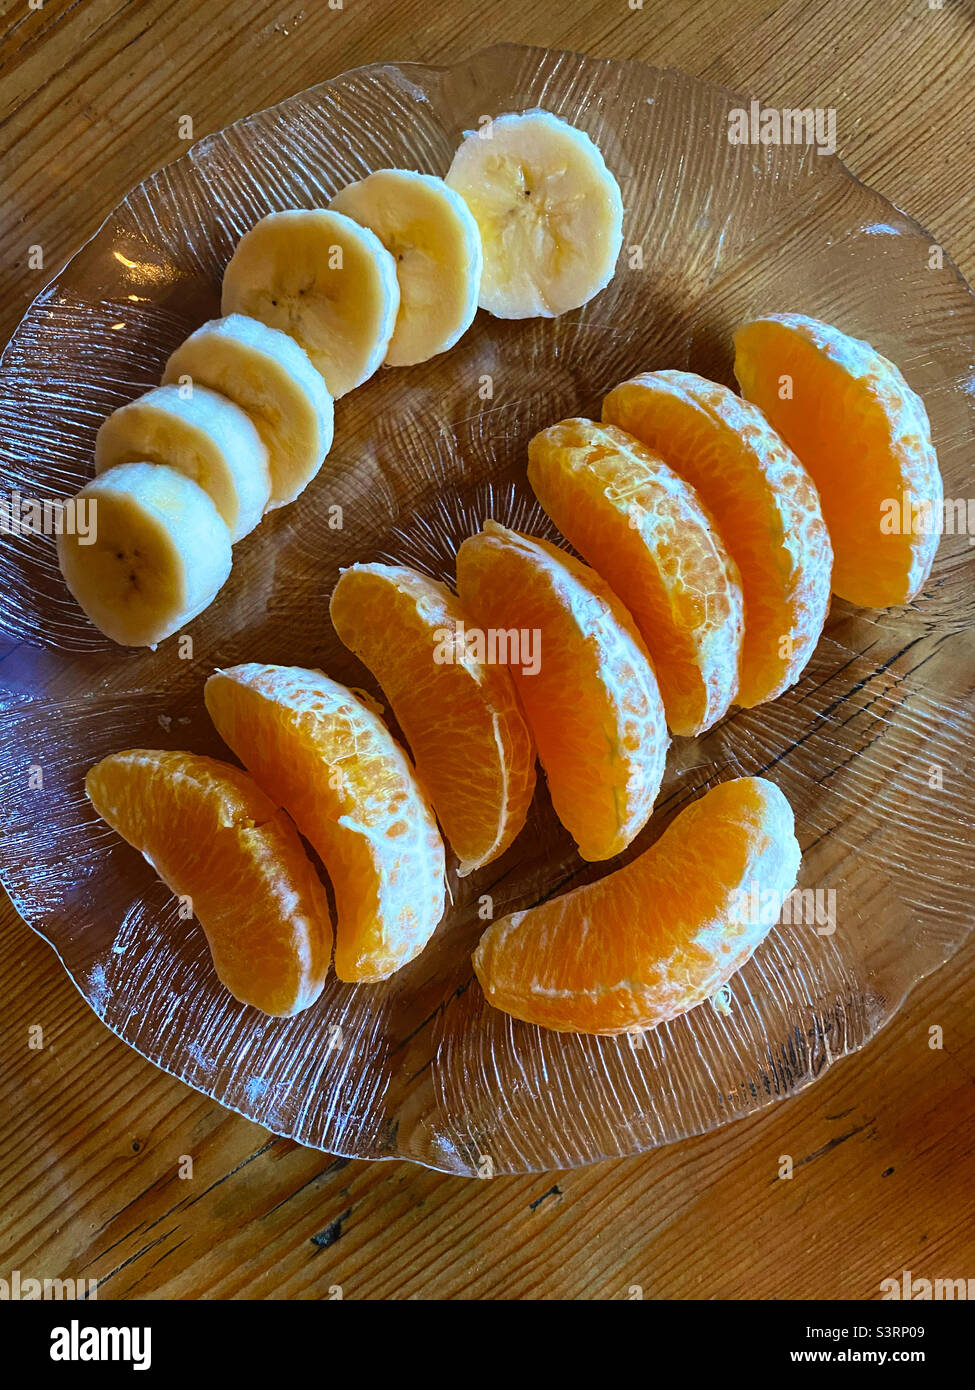 Fresh orange and banana slices on a clear glass plate Stock Photo